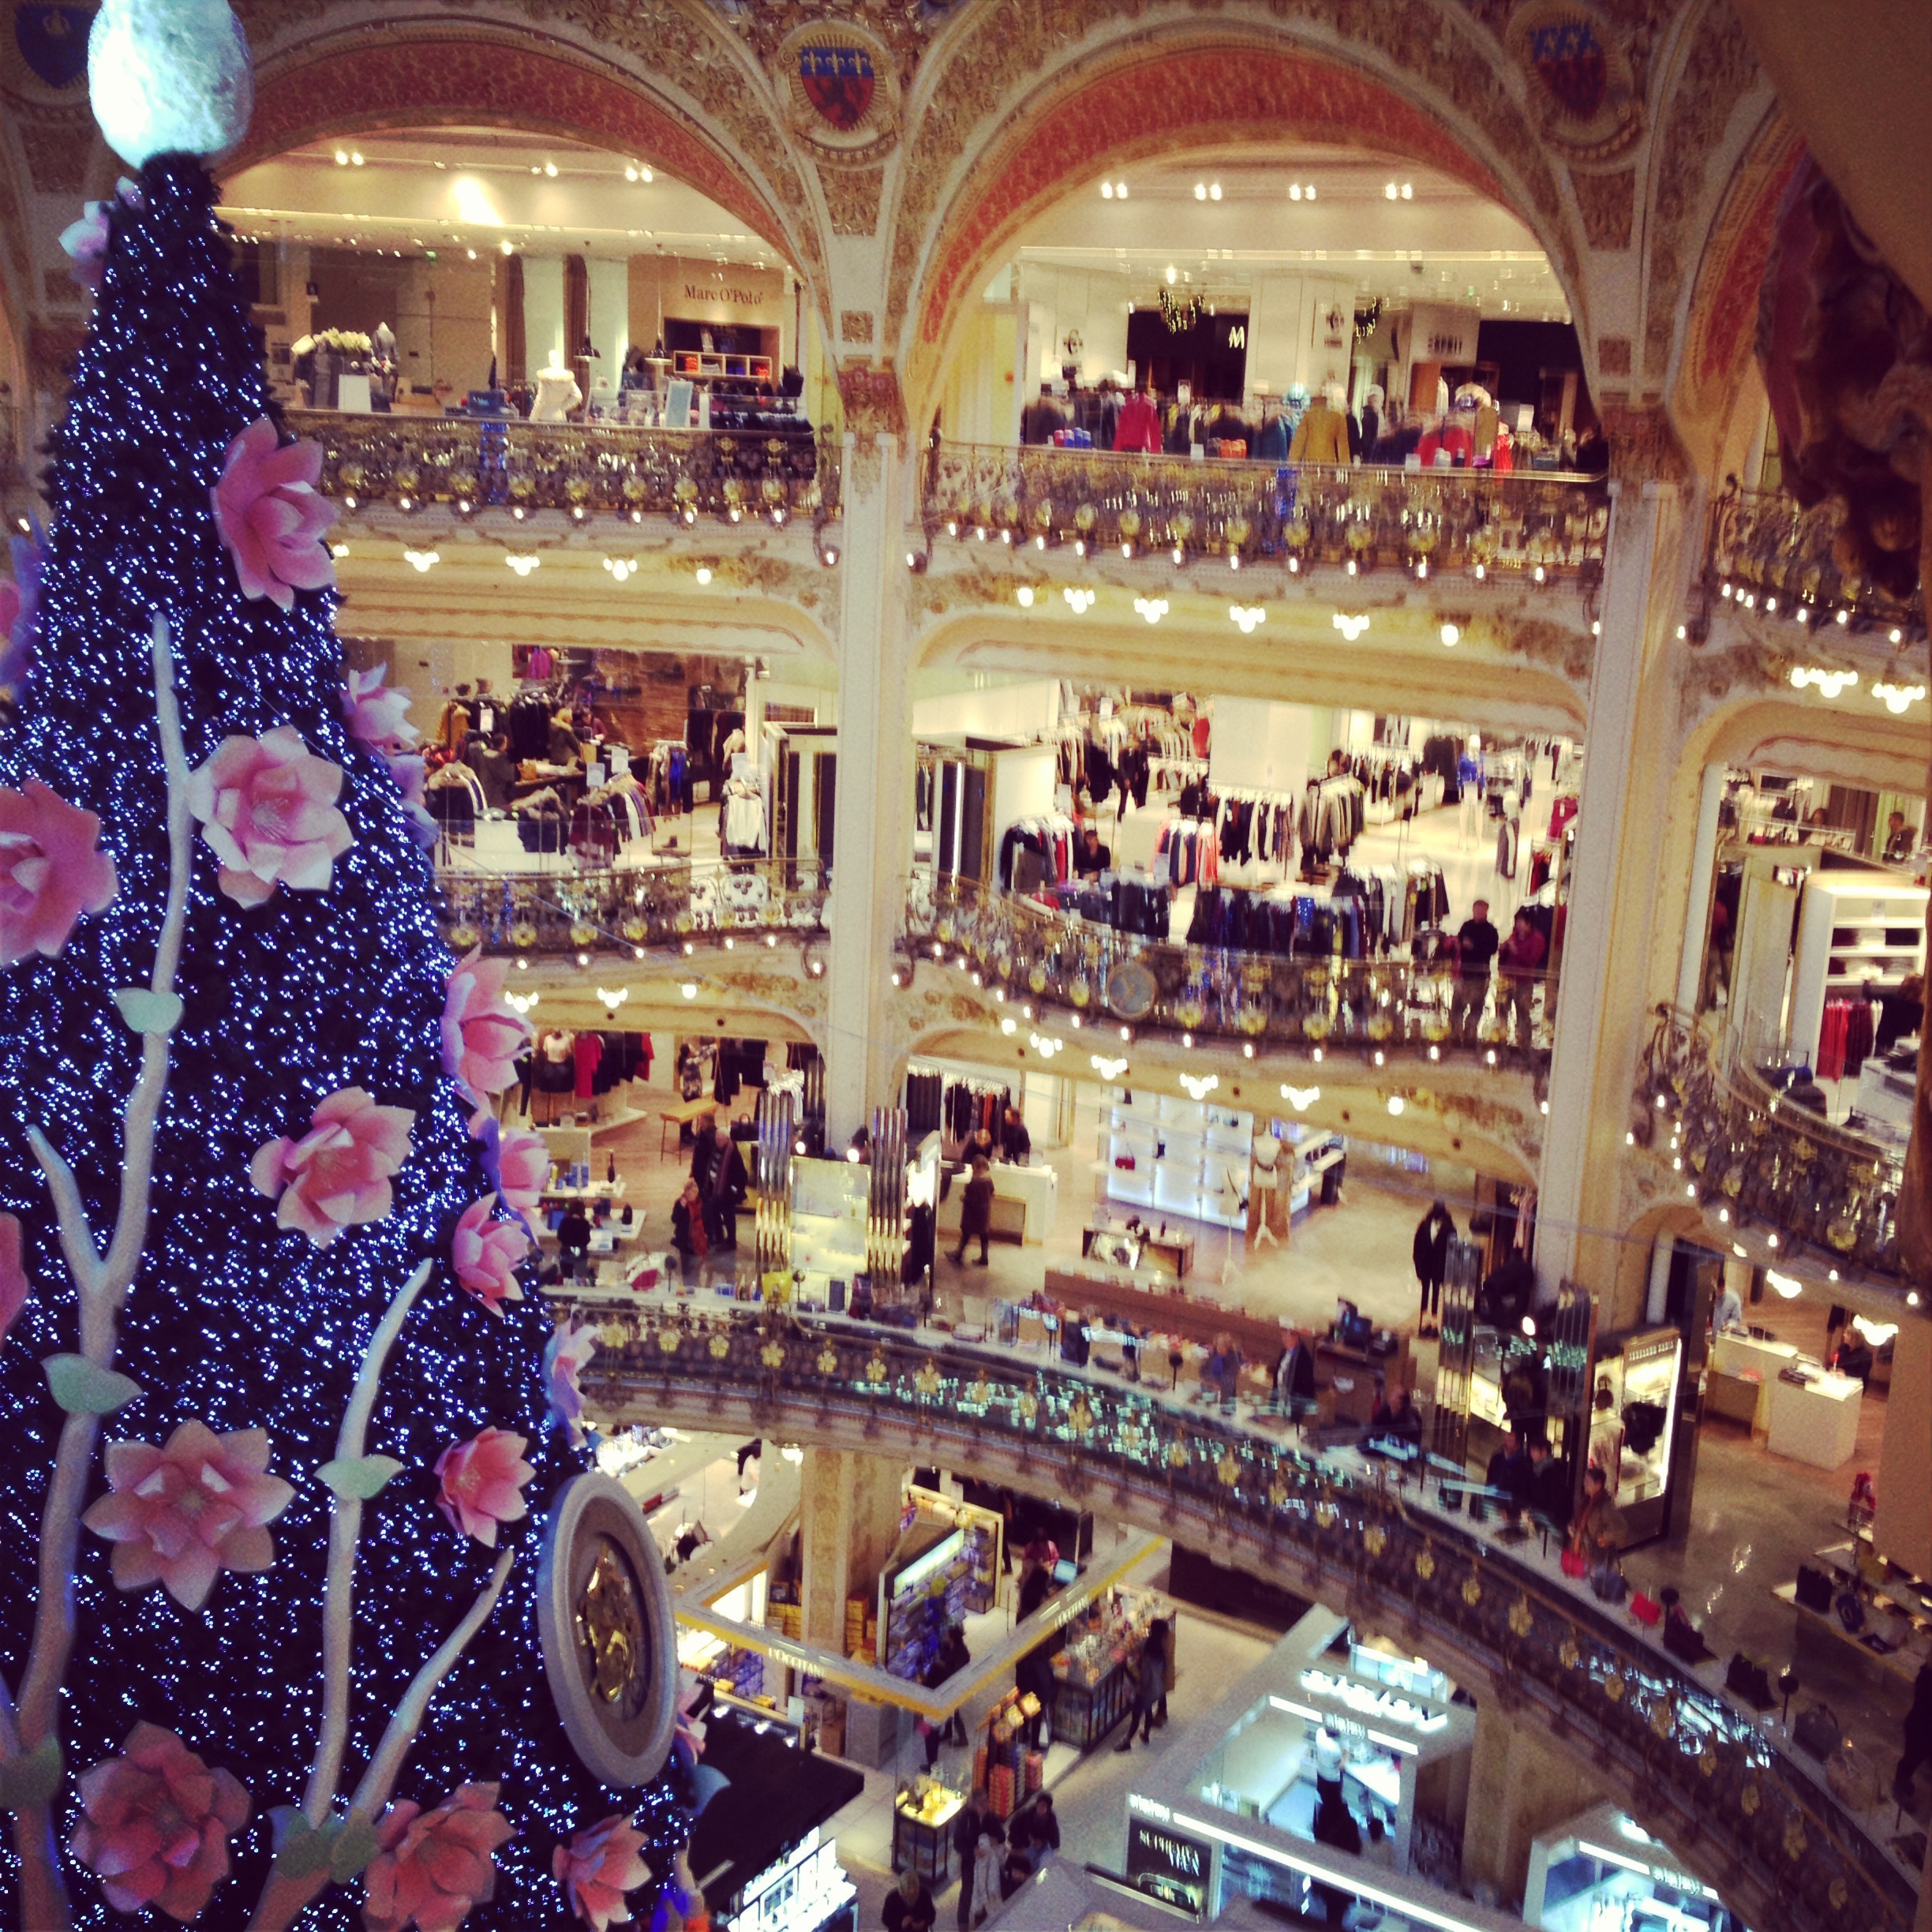  The Christmas tree inside Galeries Lafayette .... my happy place 